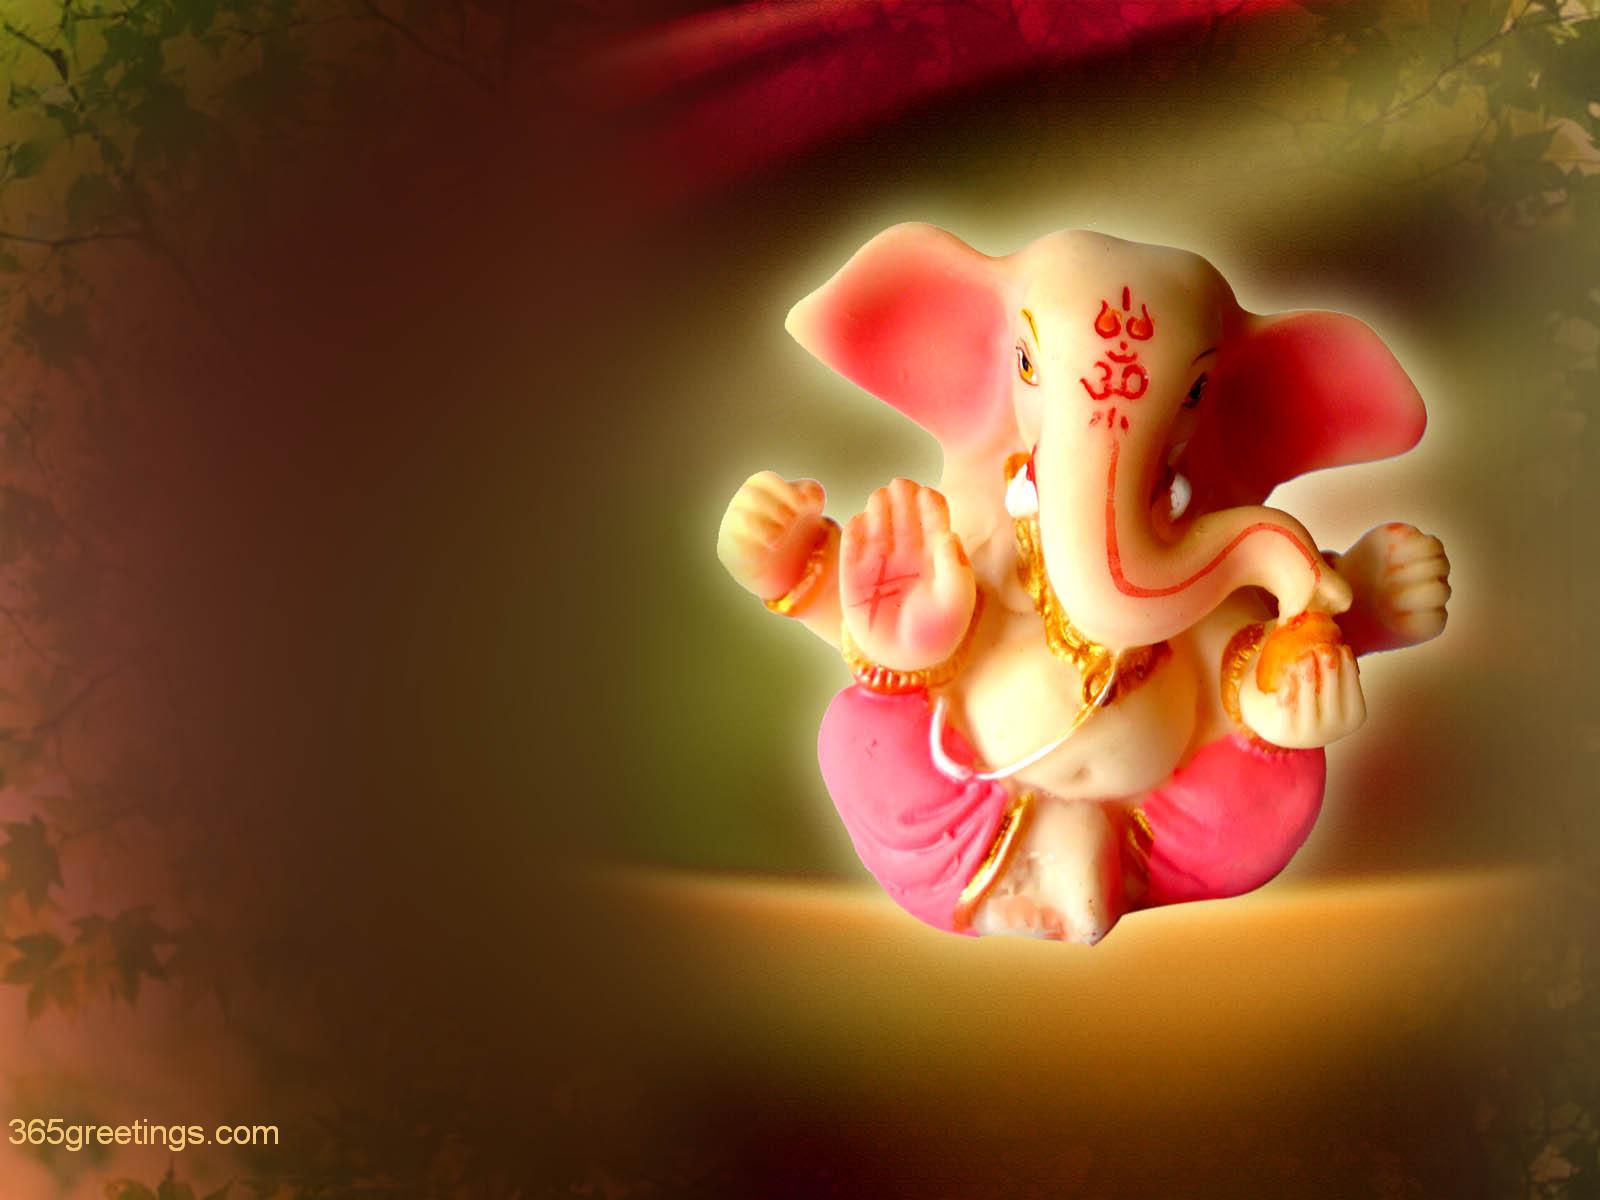 Lord Ganesha Wallpapers Free Lord Ganesha Wallpapers New Different Dp For Whatsapp 1600x1200 Wallpaper Teahub Io • best ganesha dp collection. lord ganesha wallpapers free lord